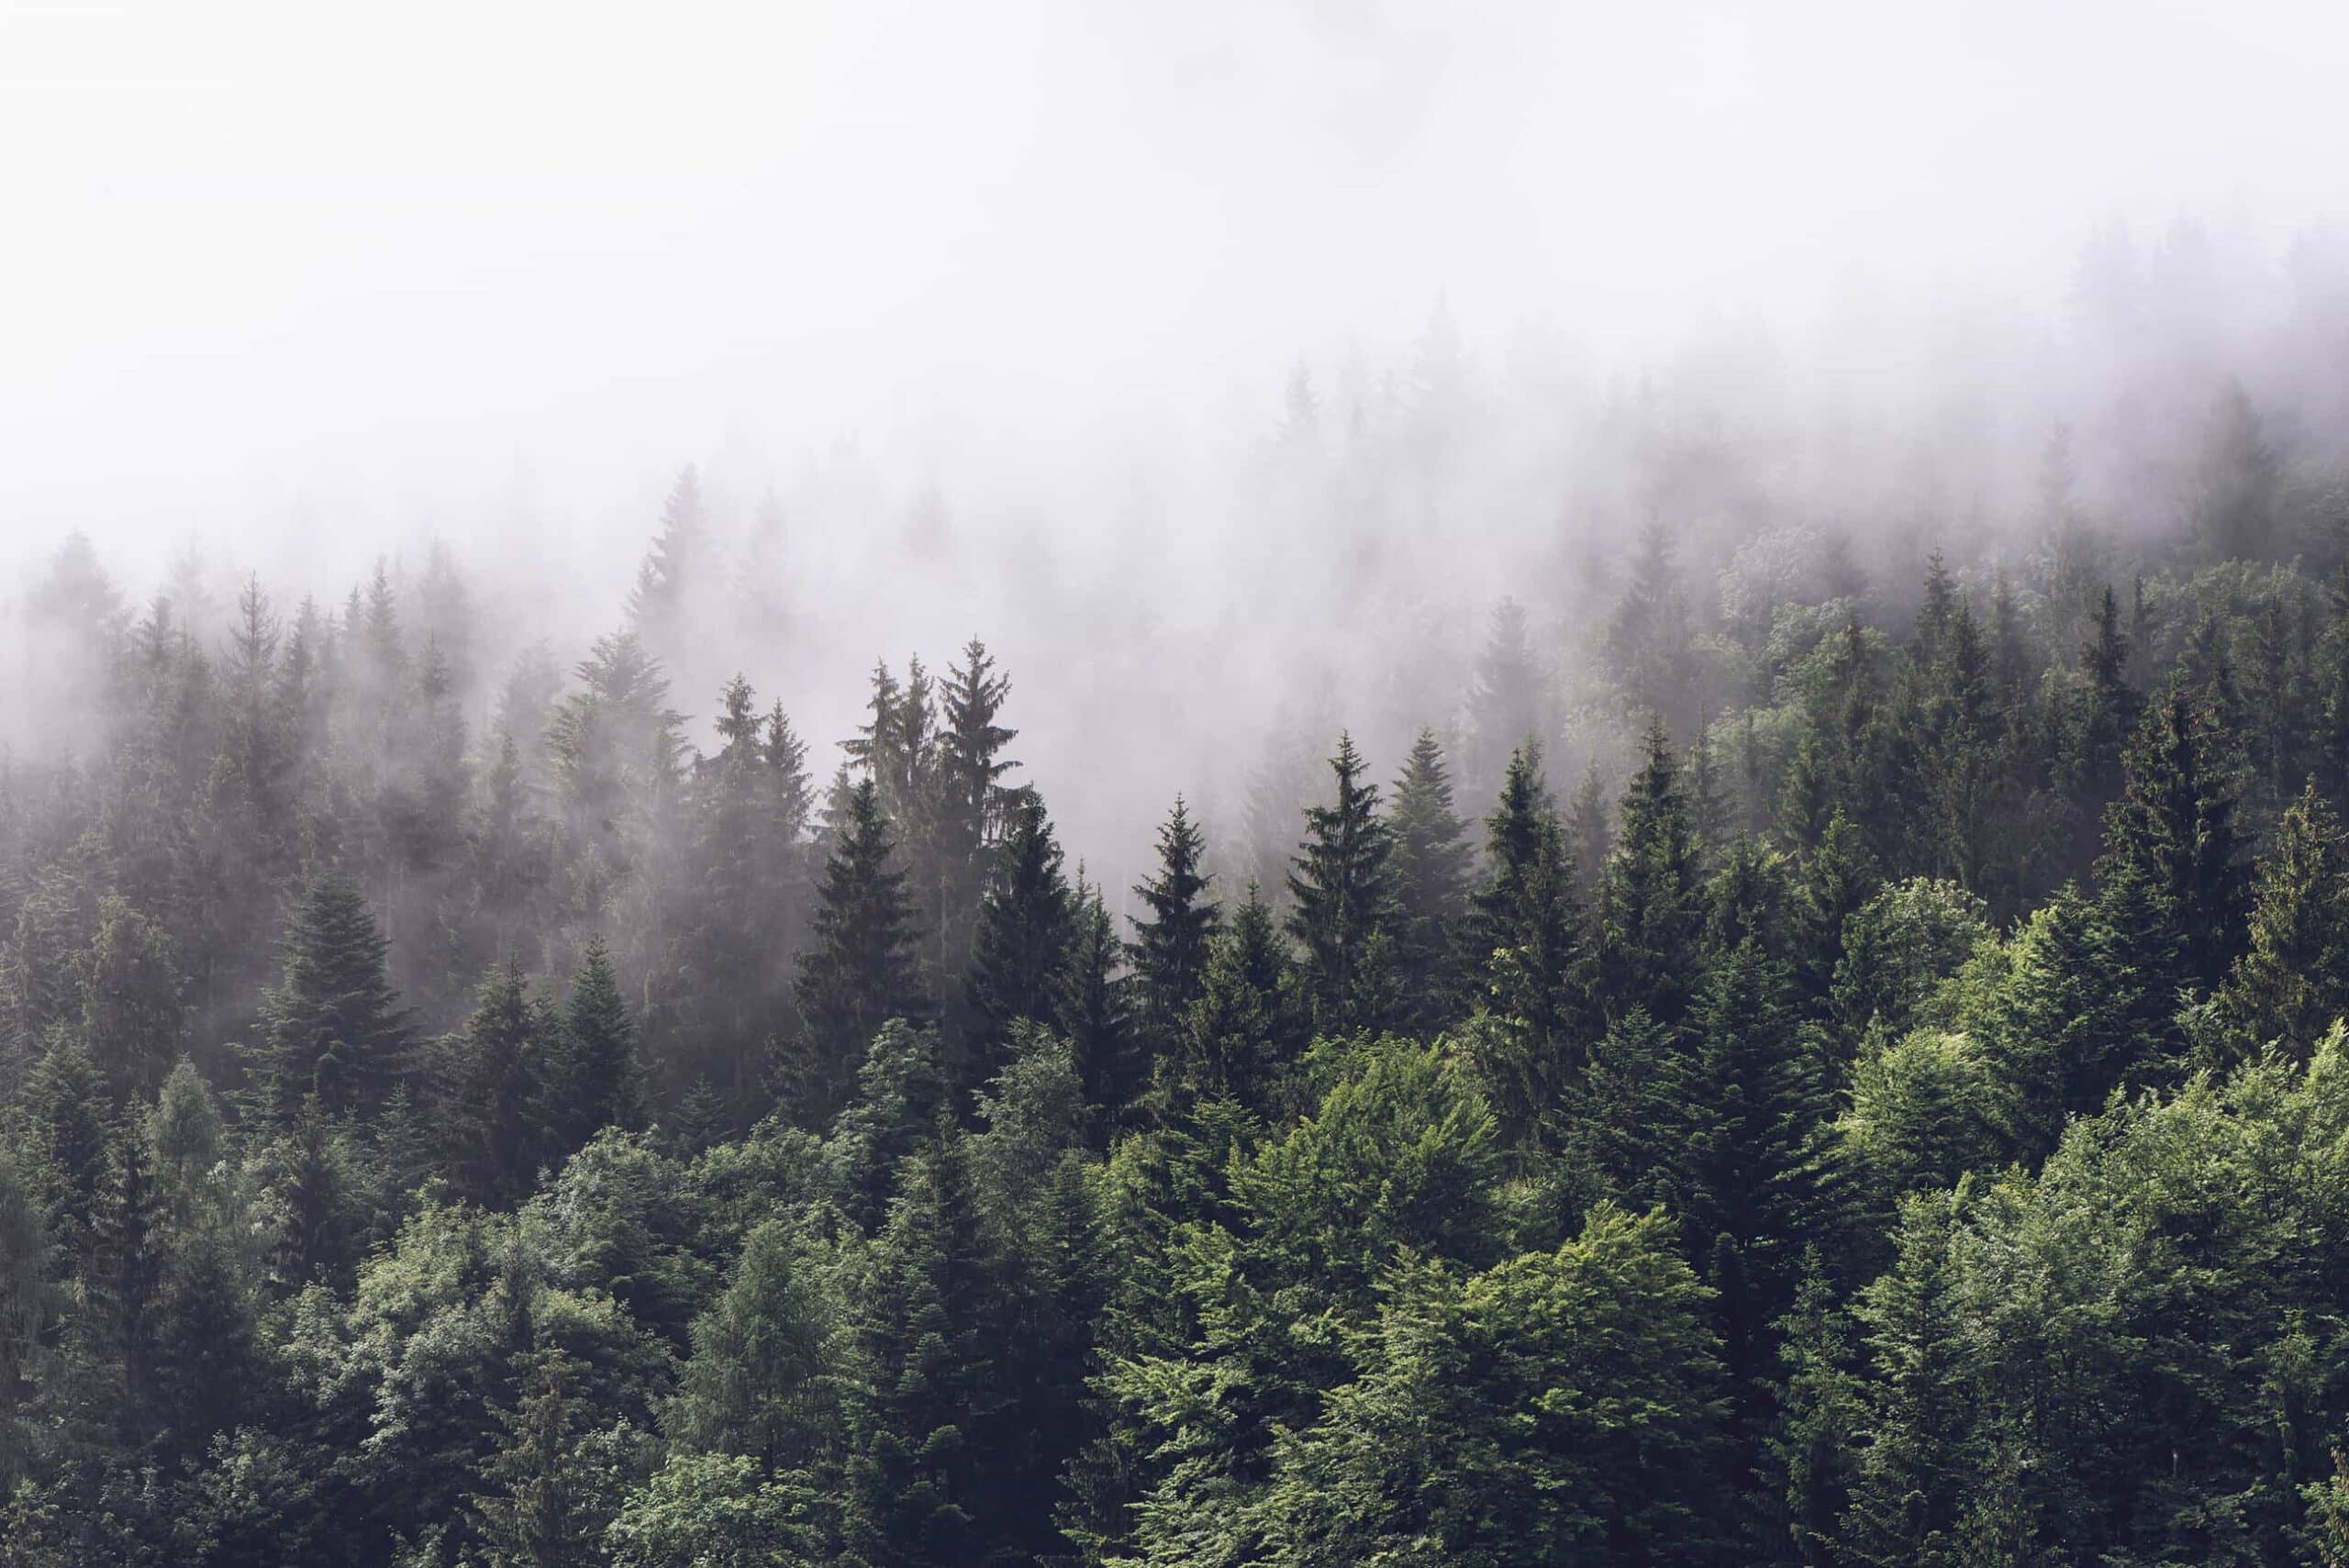 m1798_1s_Evergreen-Forest-in-Misty-Clouds-Wall-Mural-Misty-Forest_Mural-Pattern